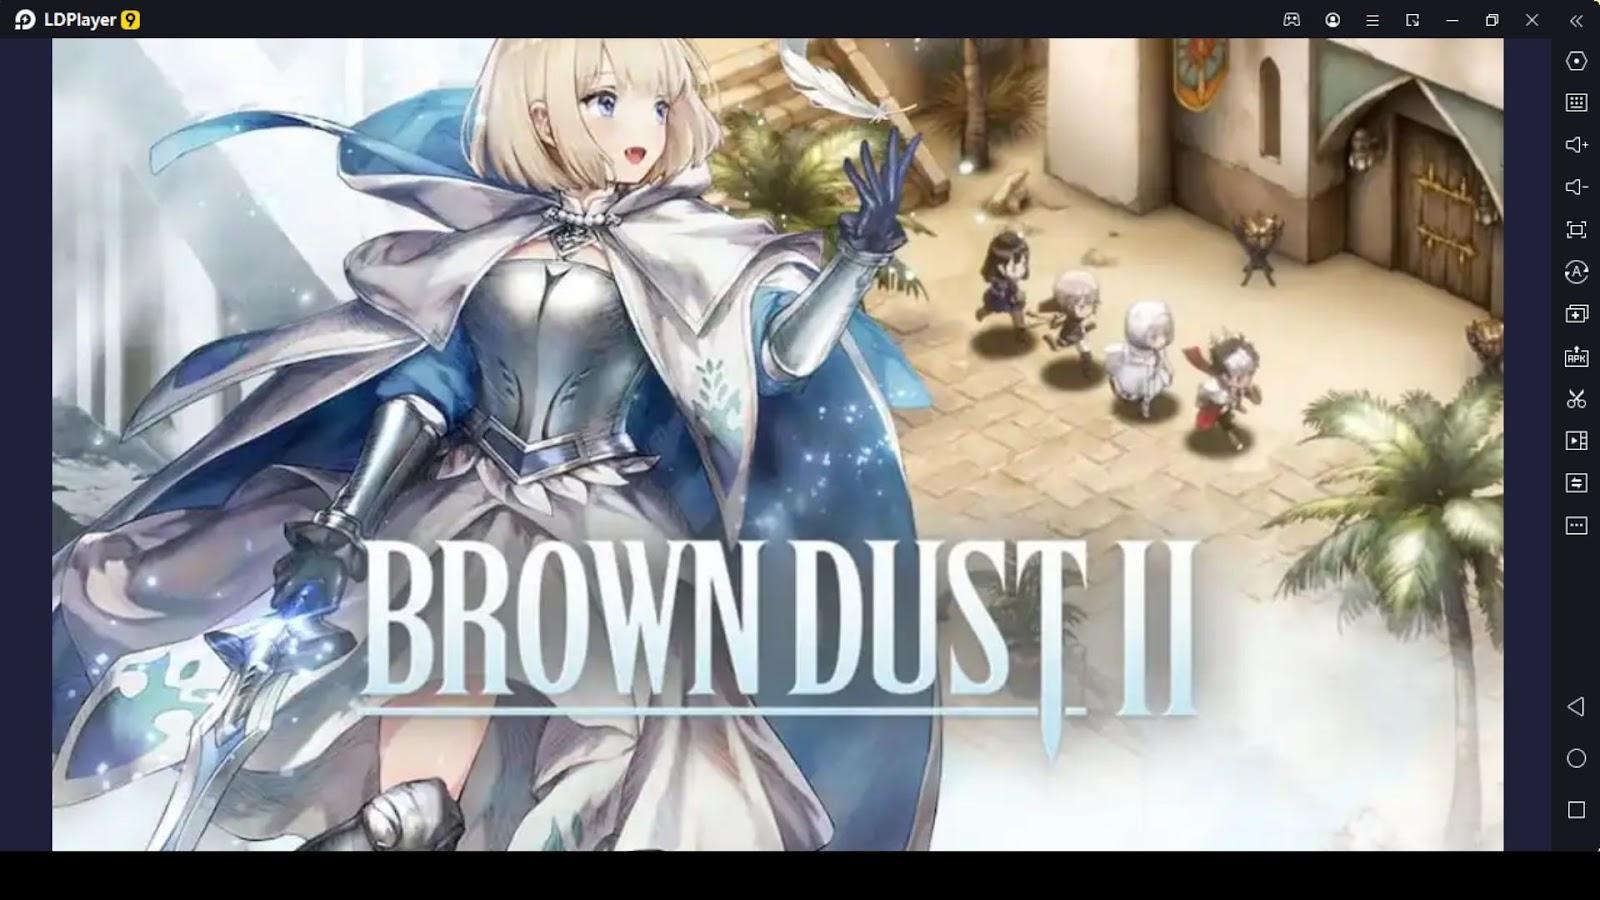 Brown Dust 2 Tier List of Characters